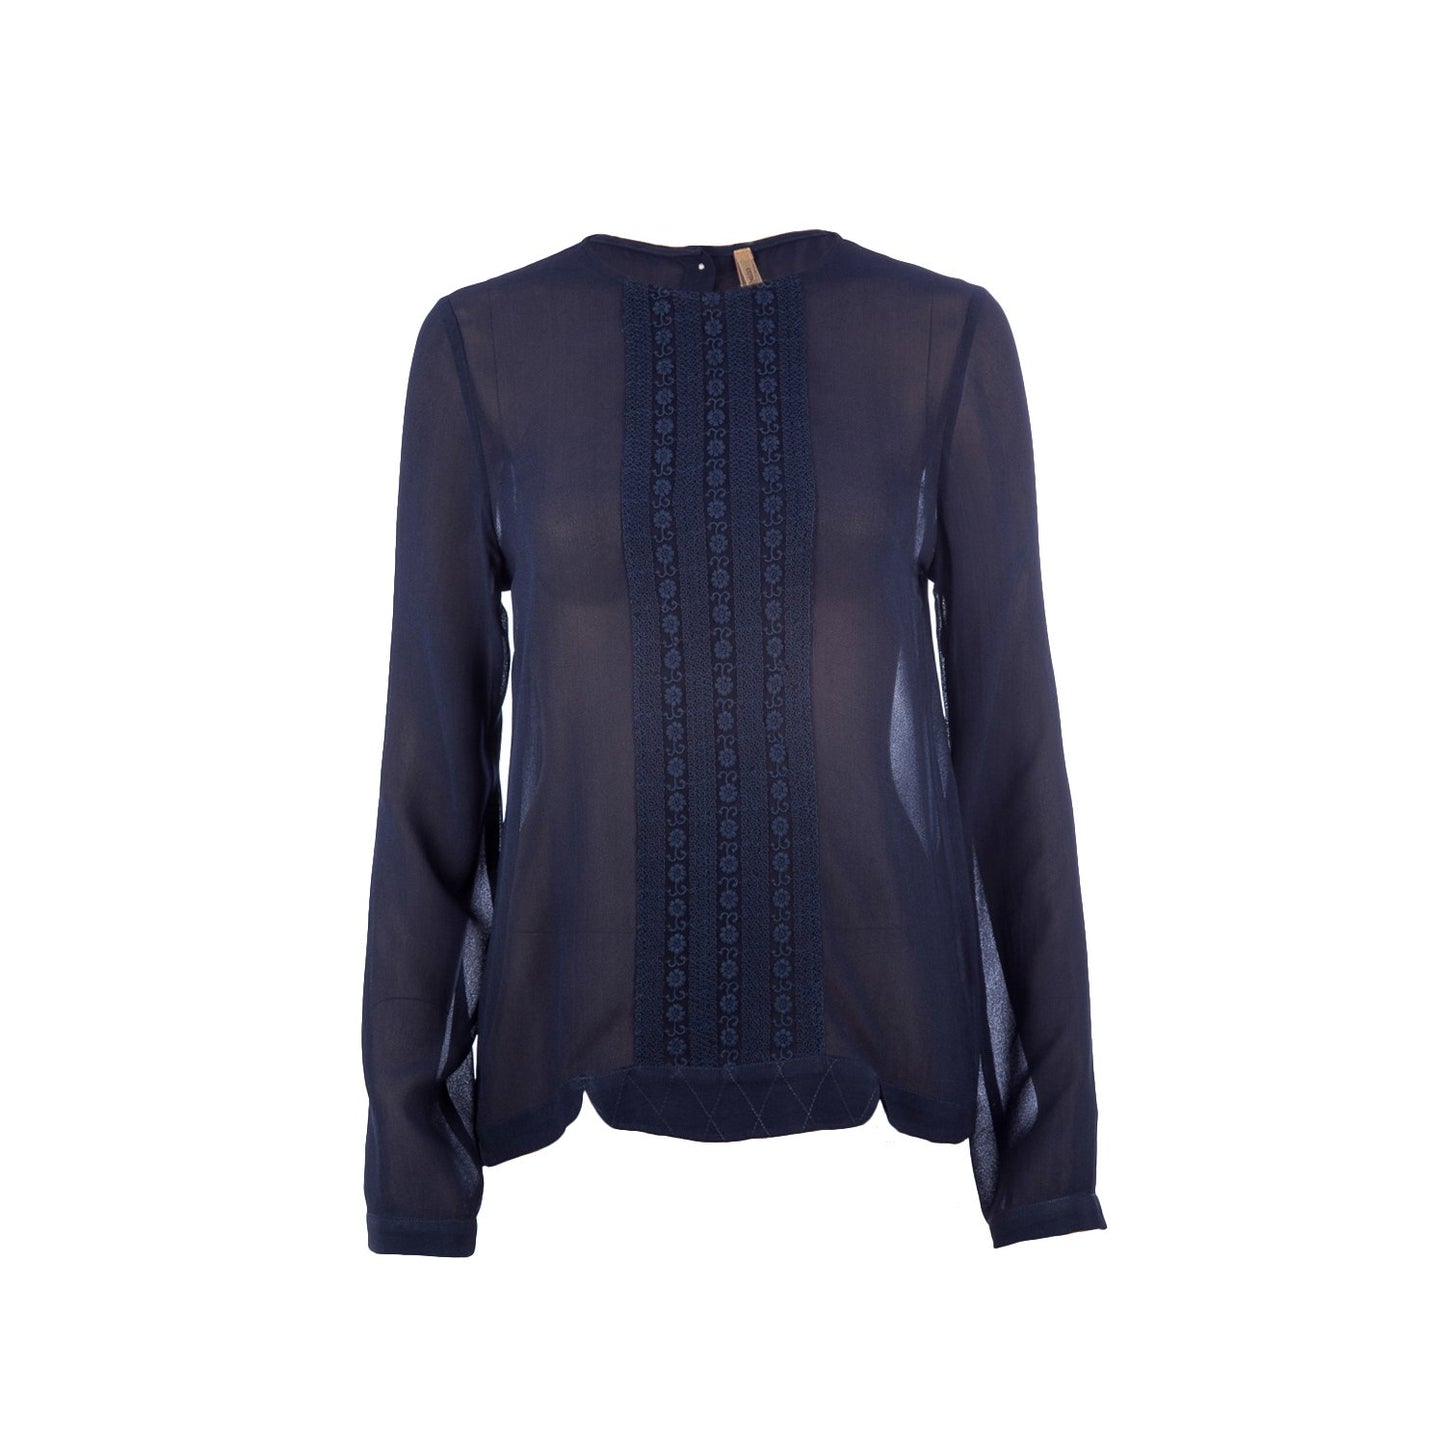 RM Sheer Ethnic Style Top Navy